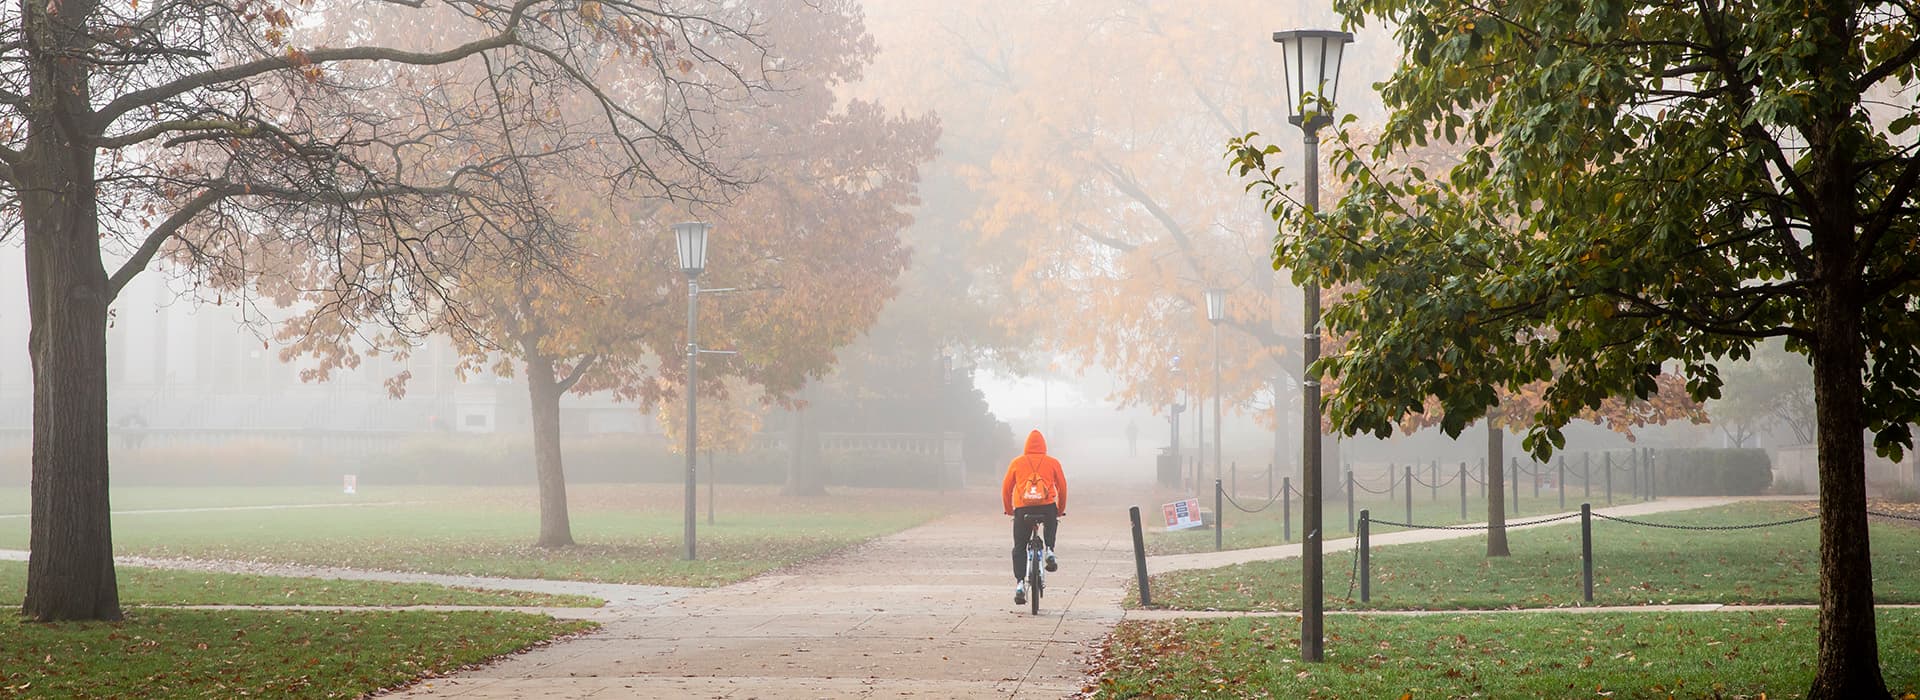 Student biking on campus in the fall